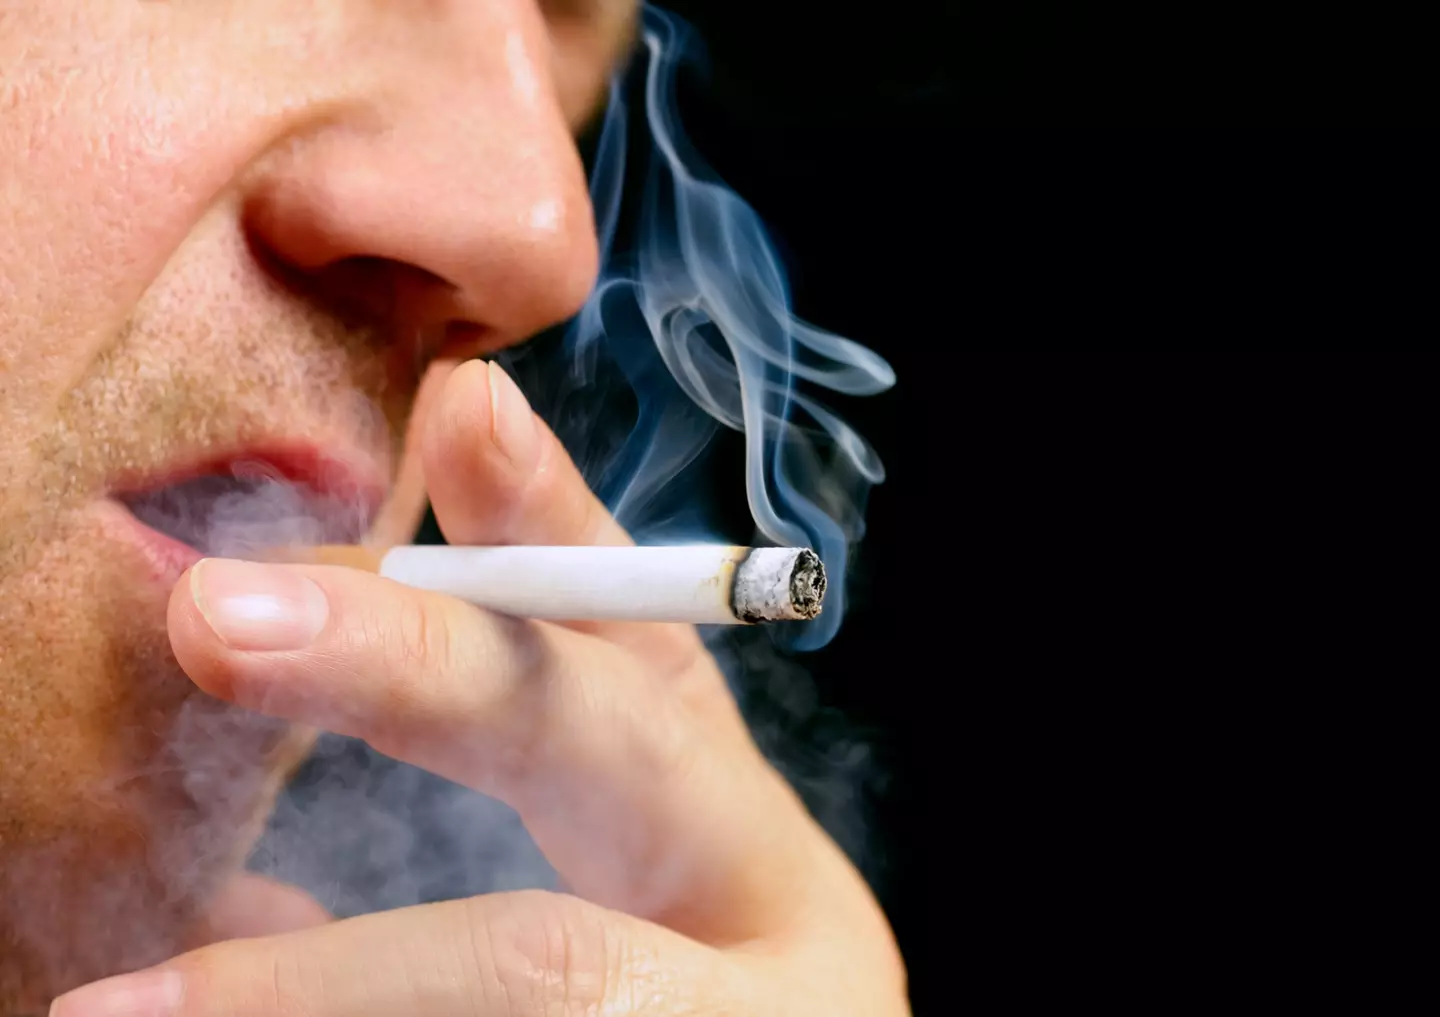 Some smokers start vaping as an alternative to cigarettes.